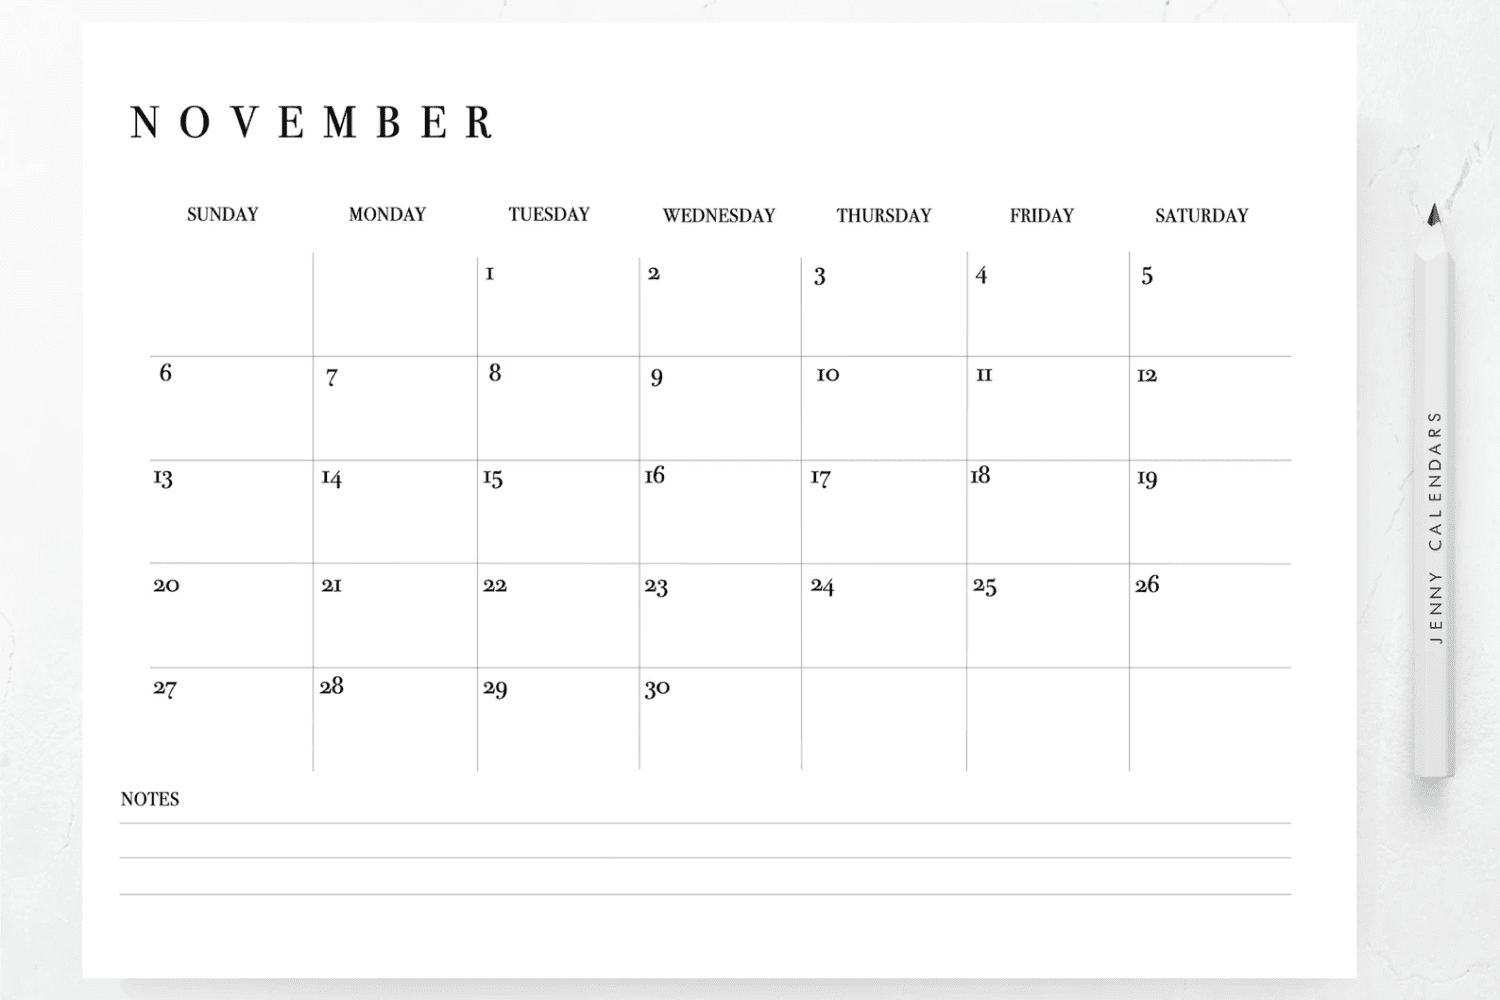 November calendar with clear style and pencil.